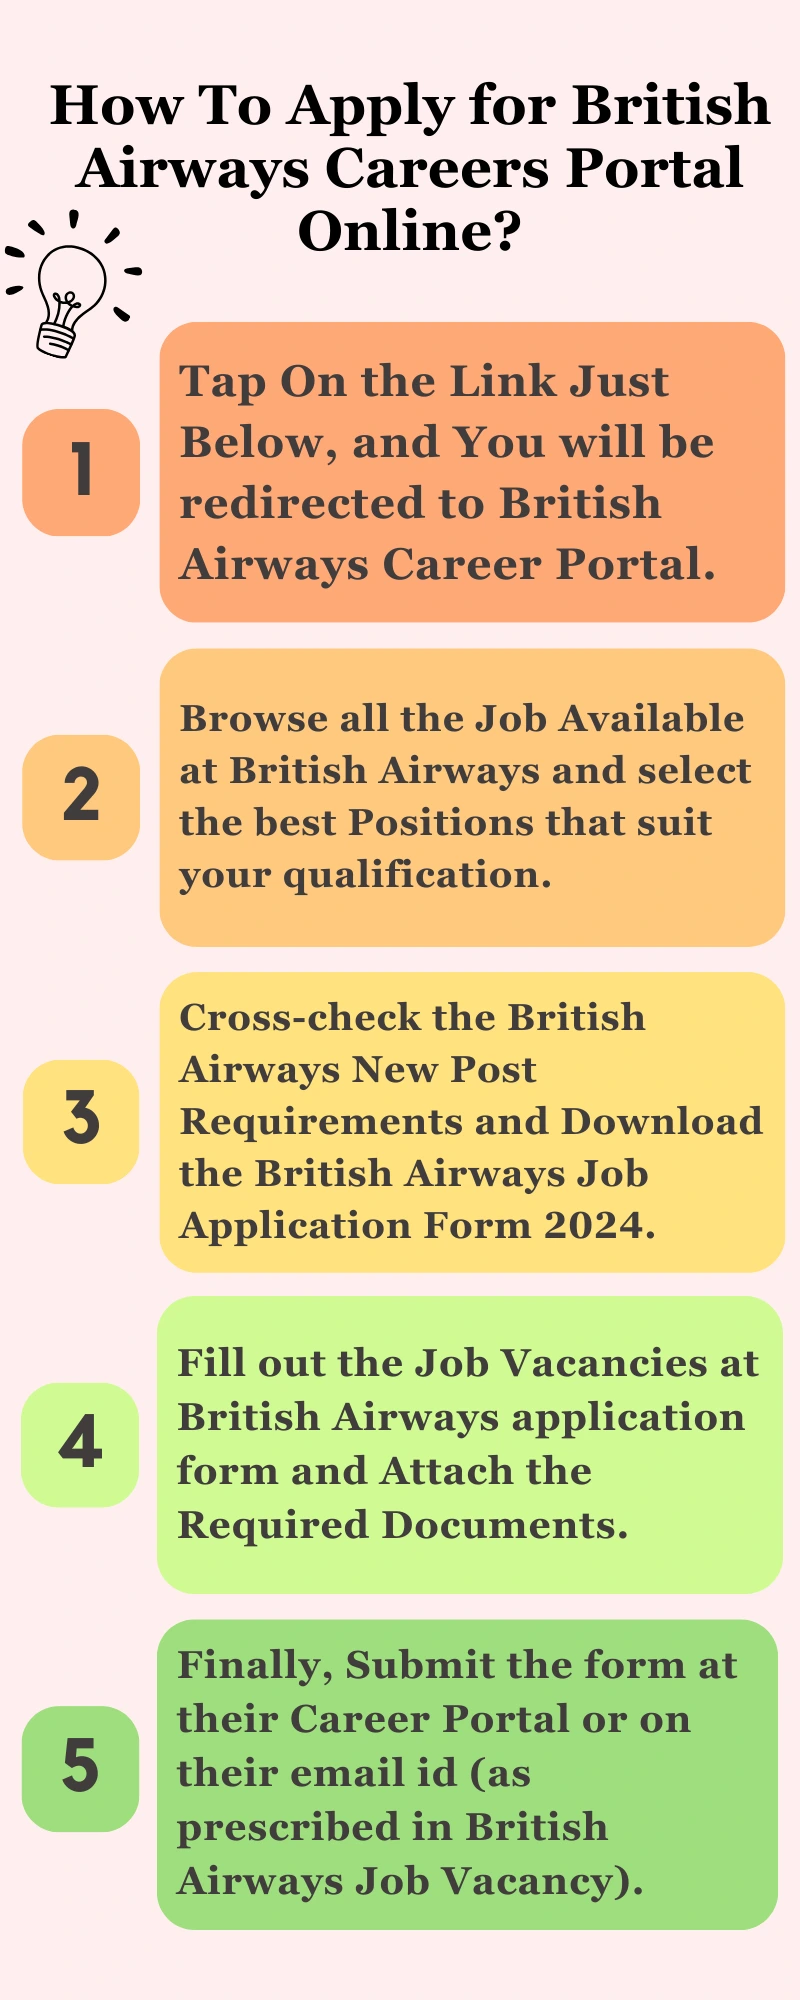 How To Apply for British Airways Careers Portal Online?